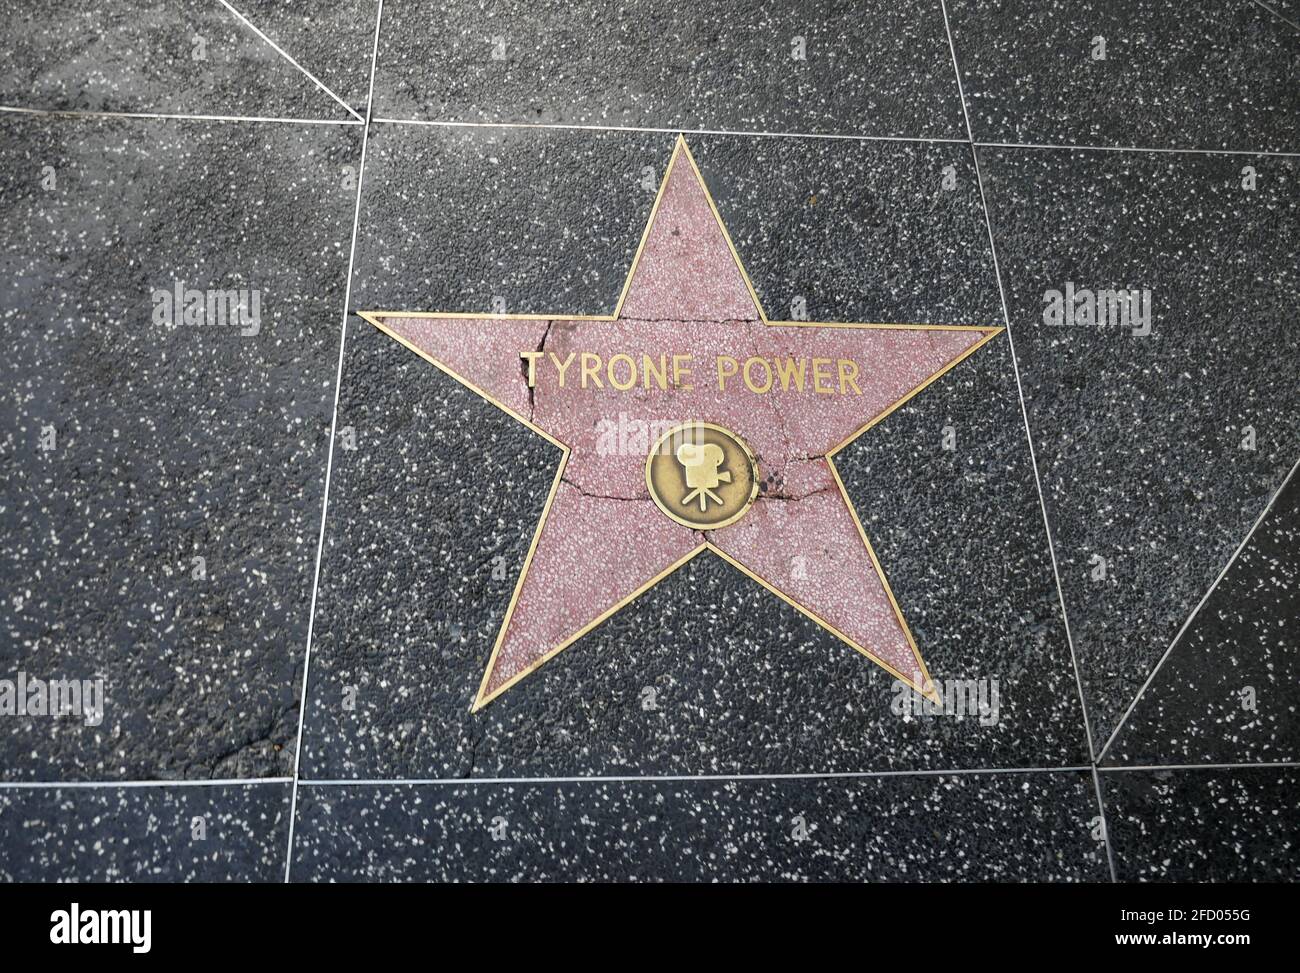 Hollywood, California, USA 17th April 2021 A general view of atmosphere of actor Tyrone Power's Star on the Hollywood Walk of Fame on April 17, 2021 in Hollywood, California, USA. Photo by Barry King/Alamy Stock Photo Stock Photo